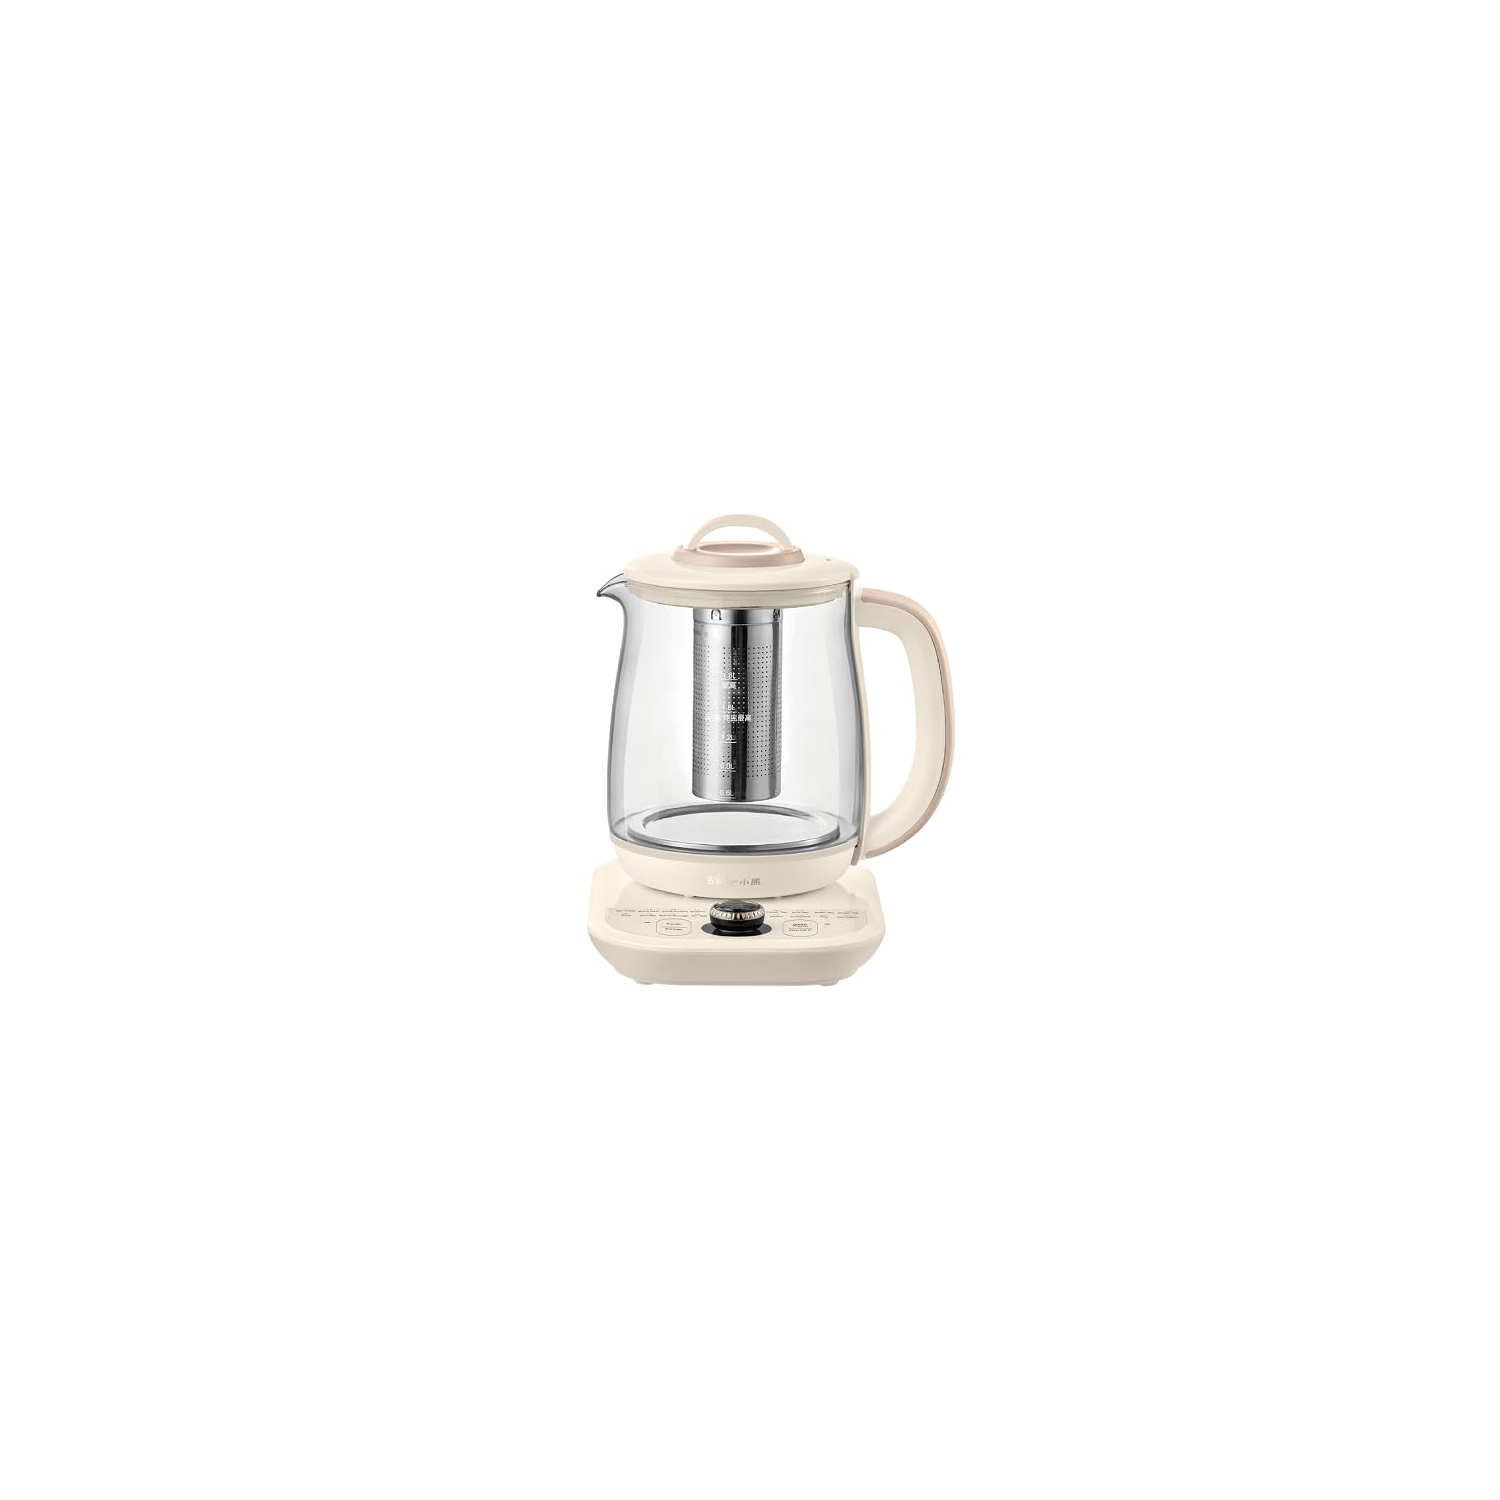 Bear YSH-C18K5 Health- Care Beverage Tea Maker and Kettle,Electric kettle with infuser, Durable 316 Stainless Steel & Glass Brew Cooker Master,8-in-1 Programmable, 4 Range Temperat